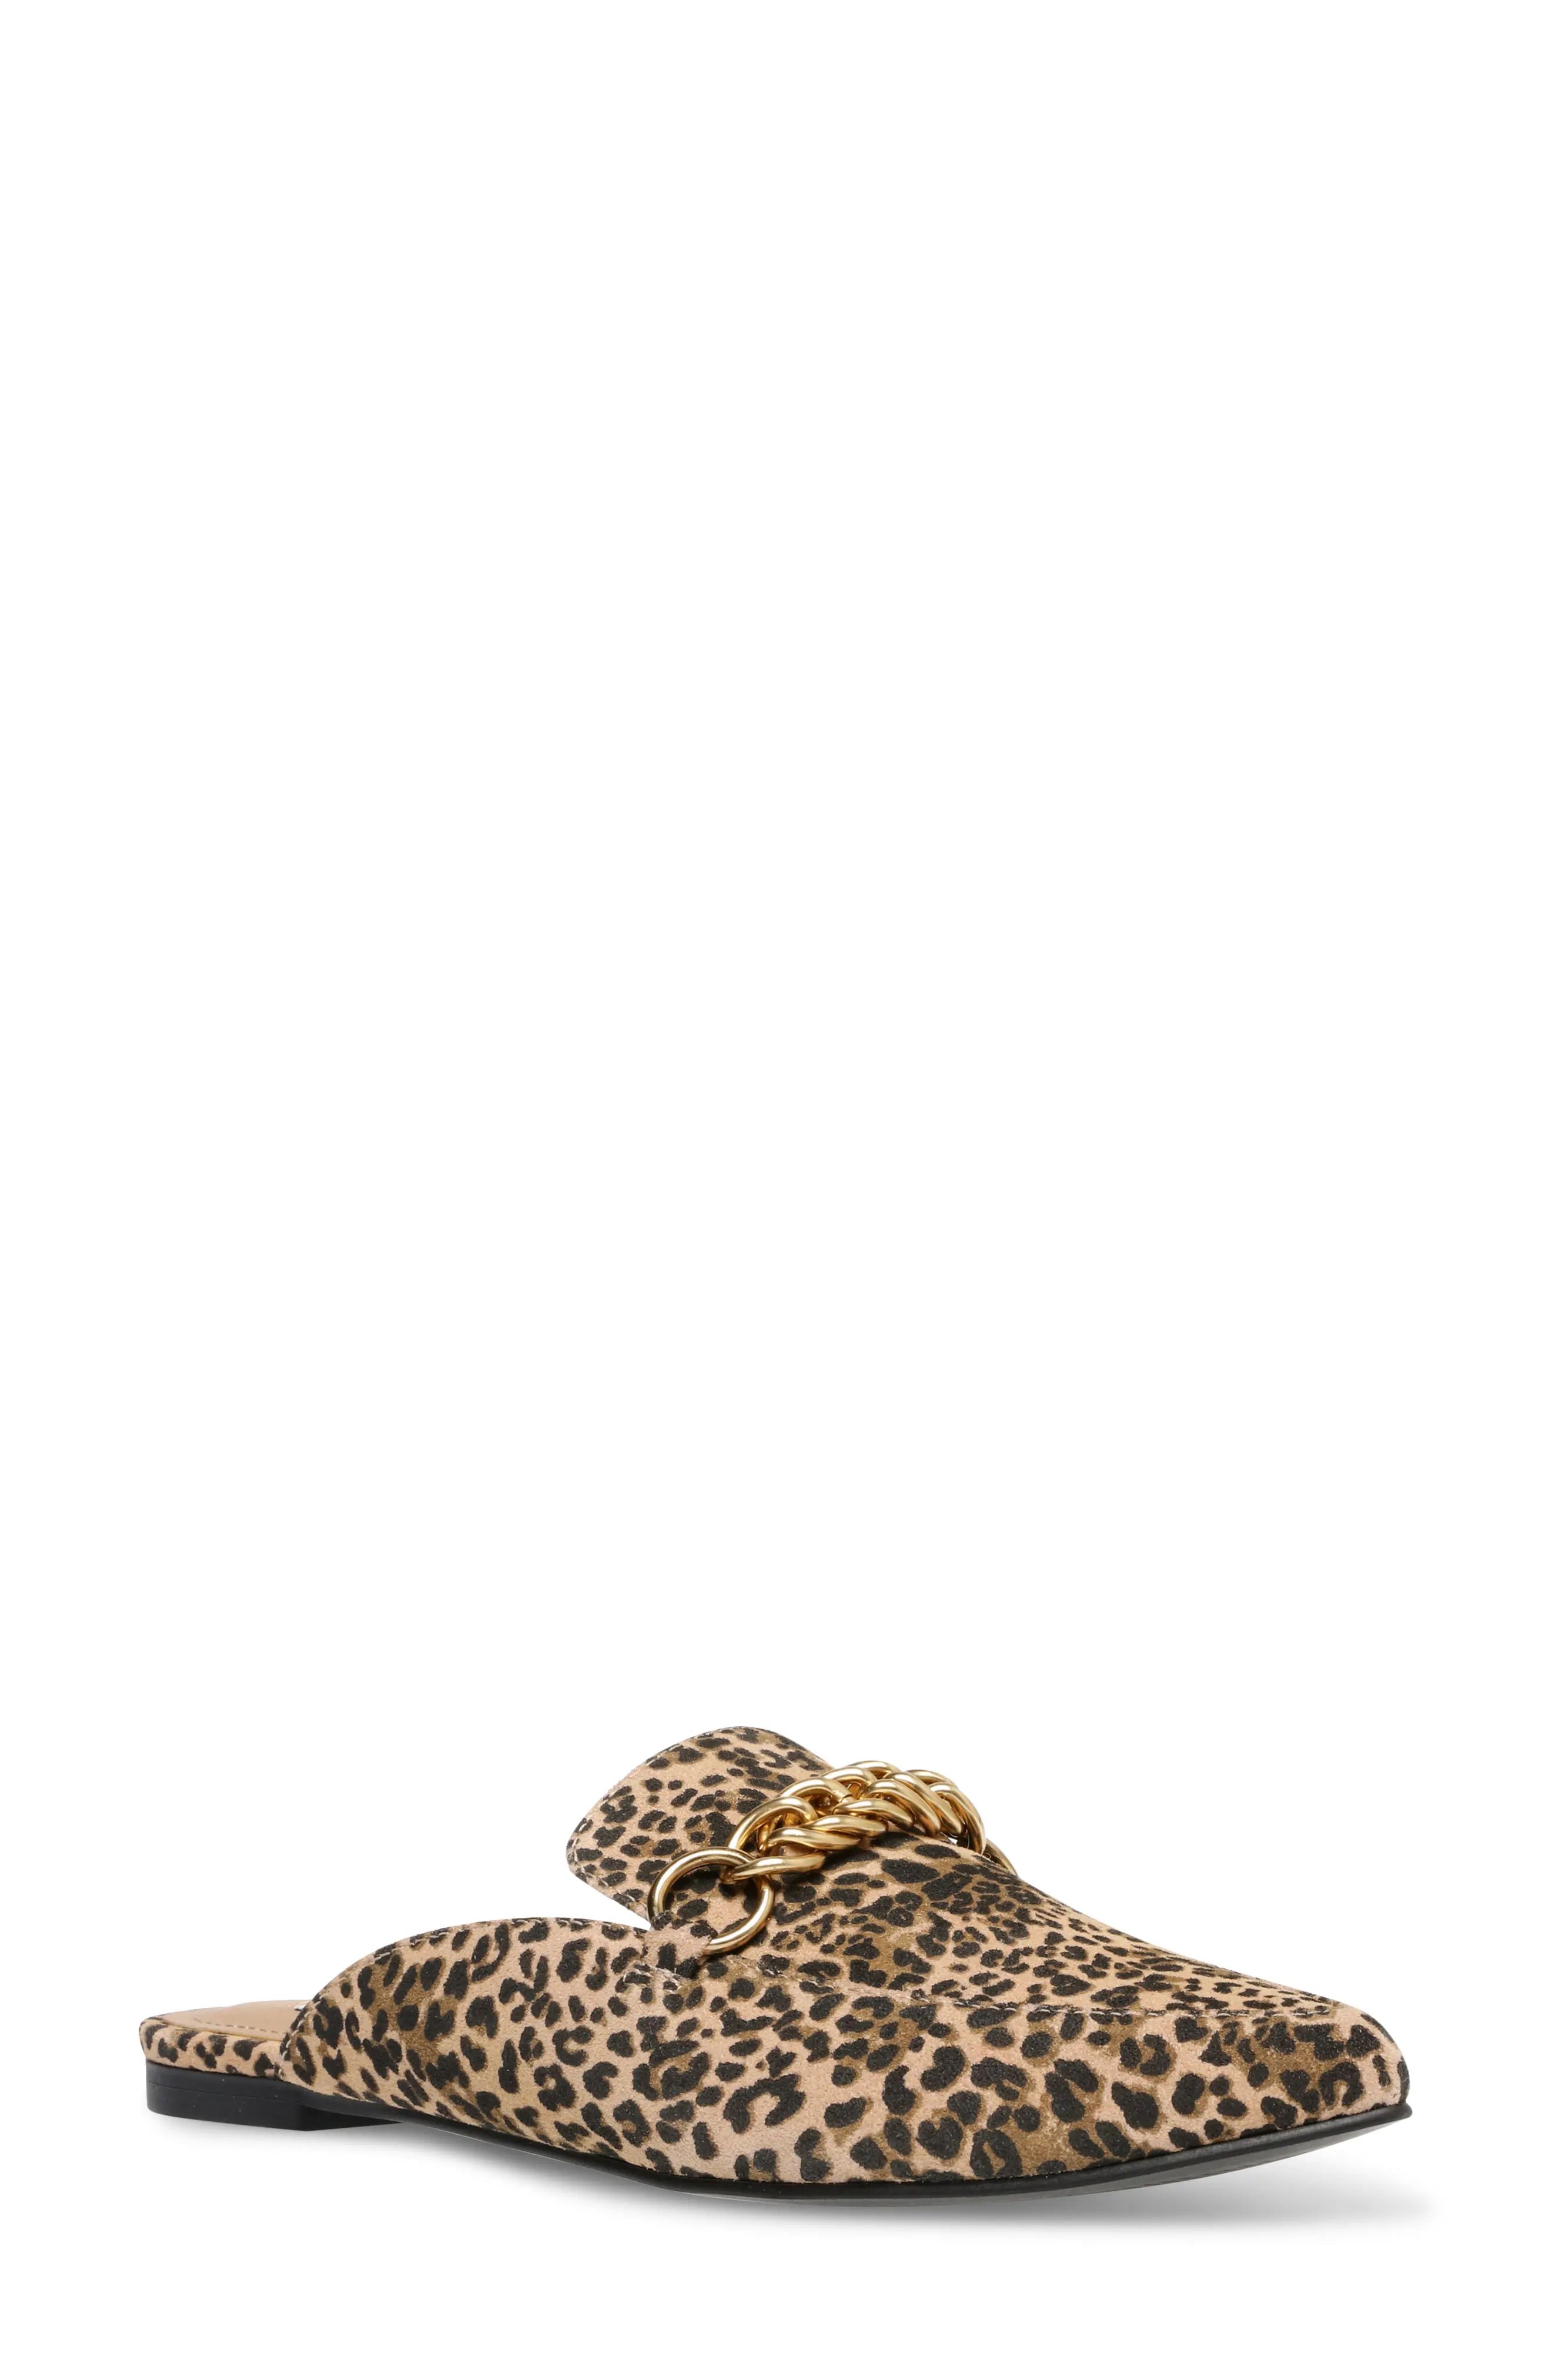 Women's Steve Madden Forever Chain Pointed Toe Mule, Size 5.5 M - Brown | Nordstrom